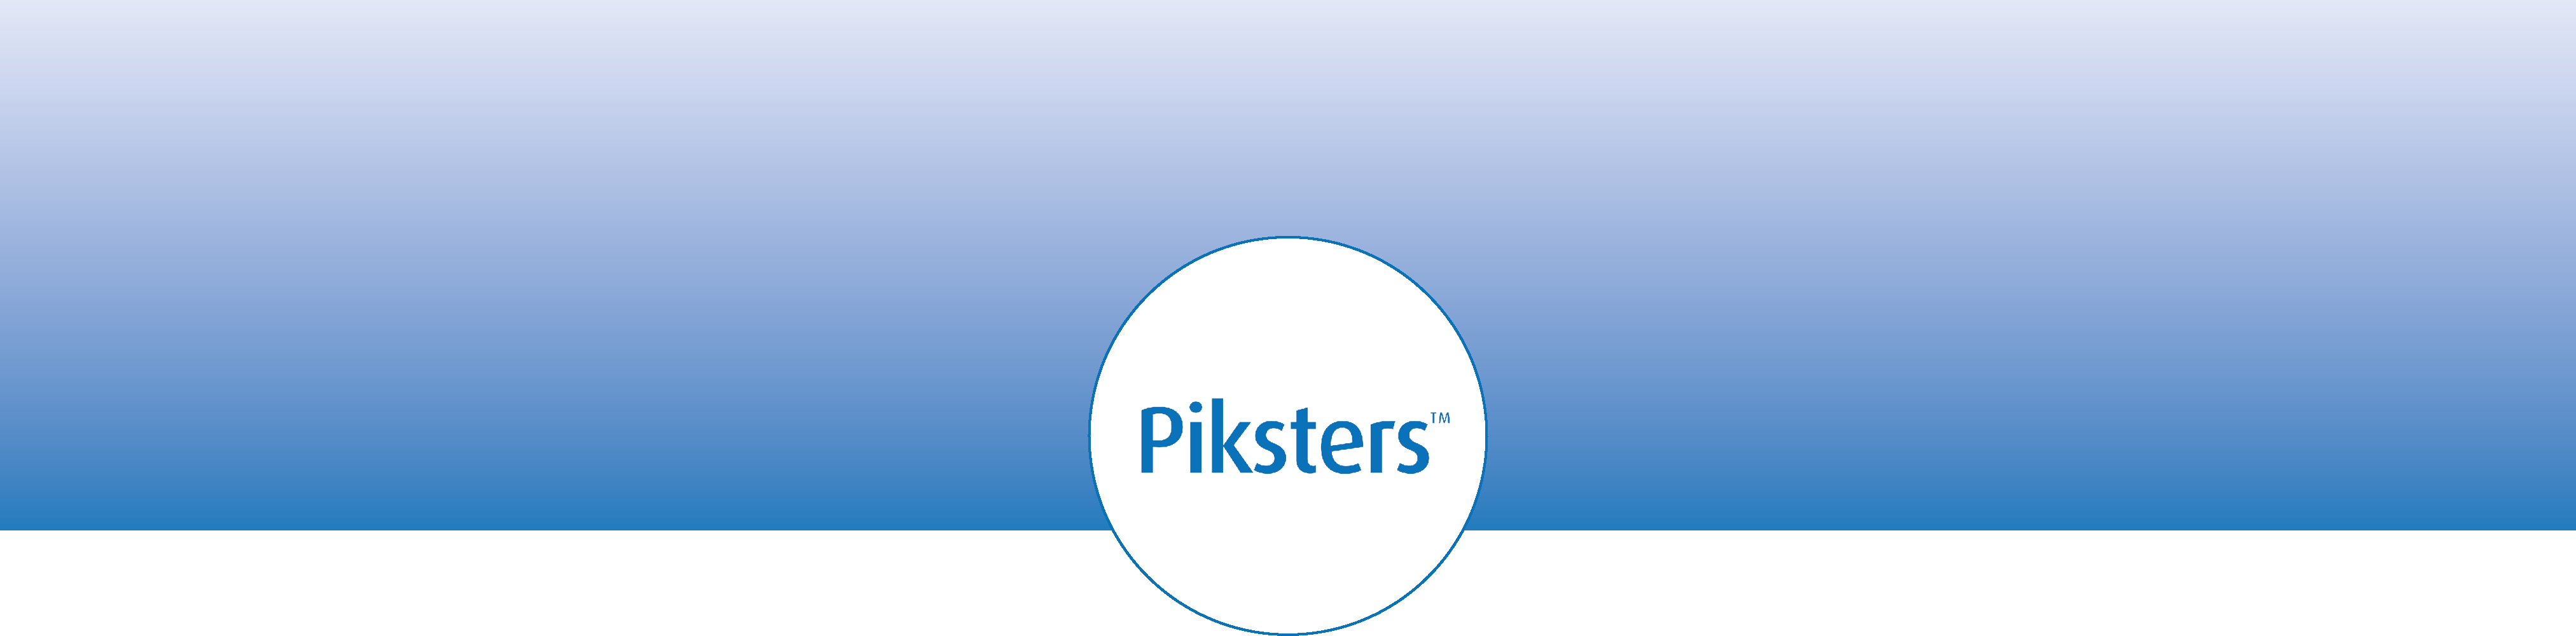 banner_piksters